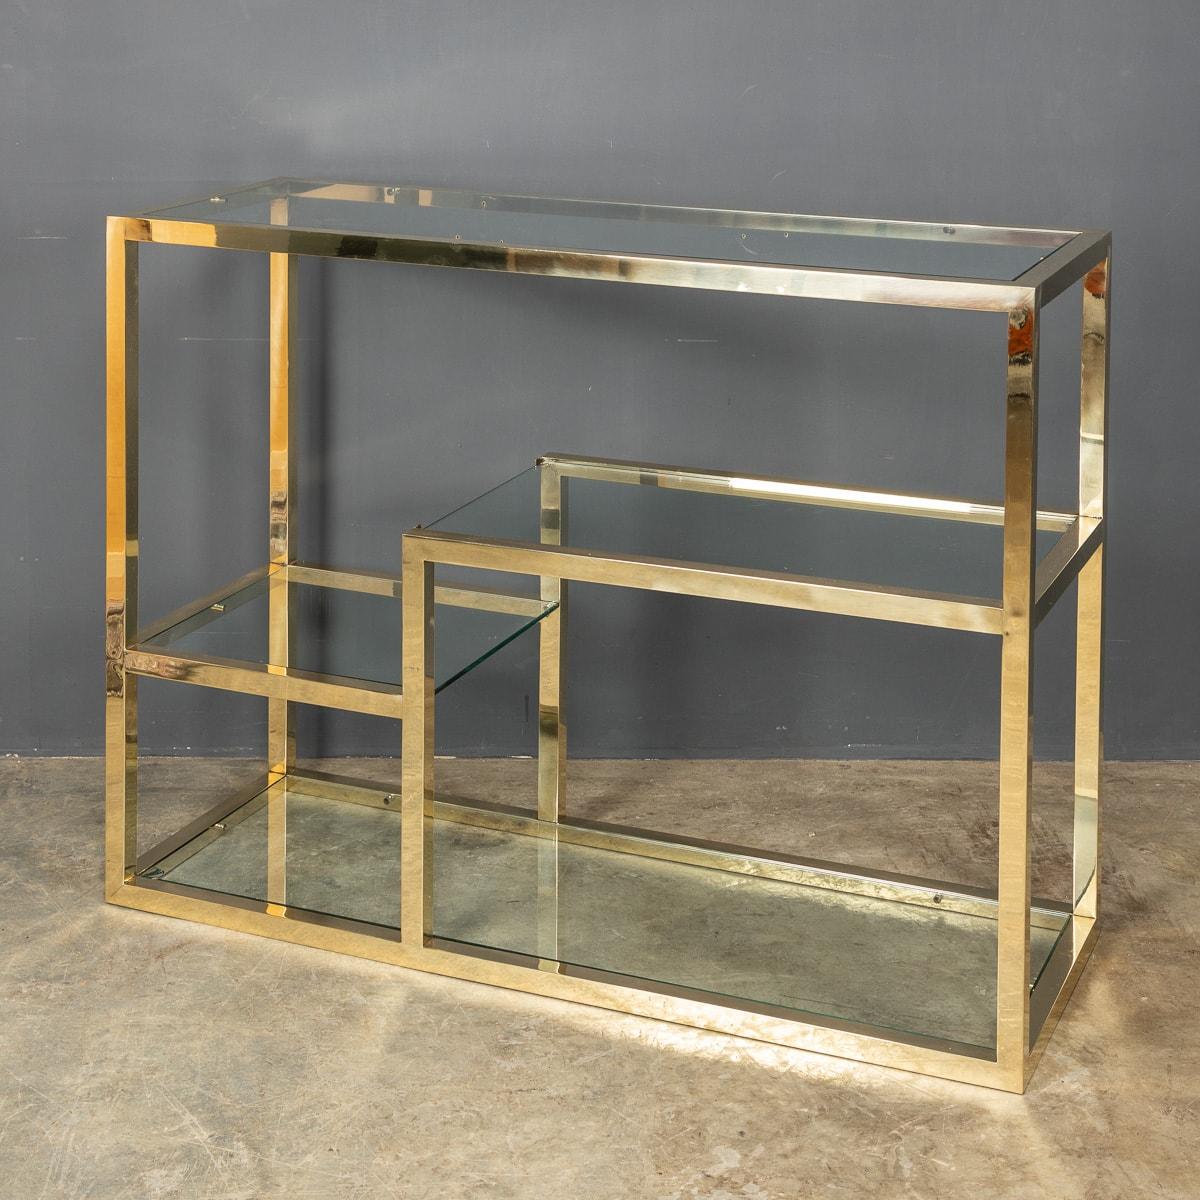 Stylish 20th Century smart four tier etegere with glass shelves of various sizes in a sturdy highly polished brass frame, c.1970.

CONDITION
In Great Condition - wear as expected.

SIZE
Height: 90cm
Width: 120cm
Depth: 45cm.